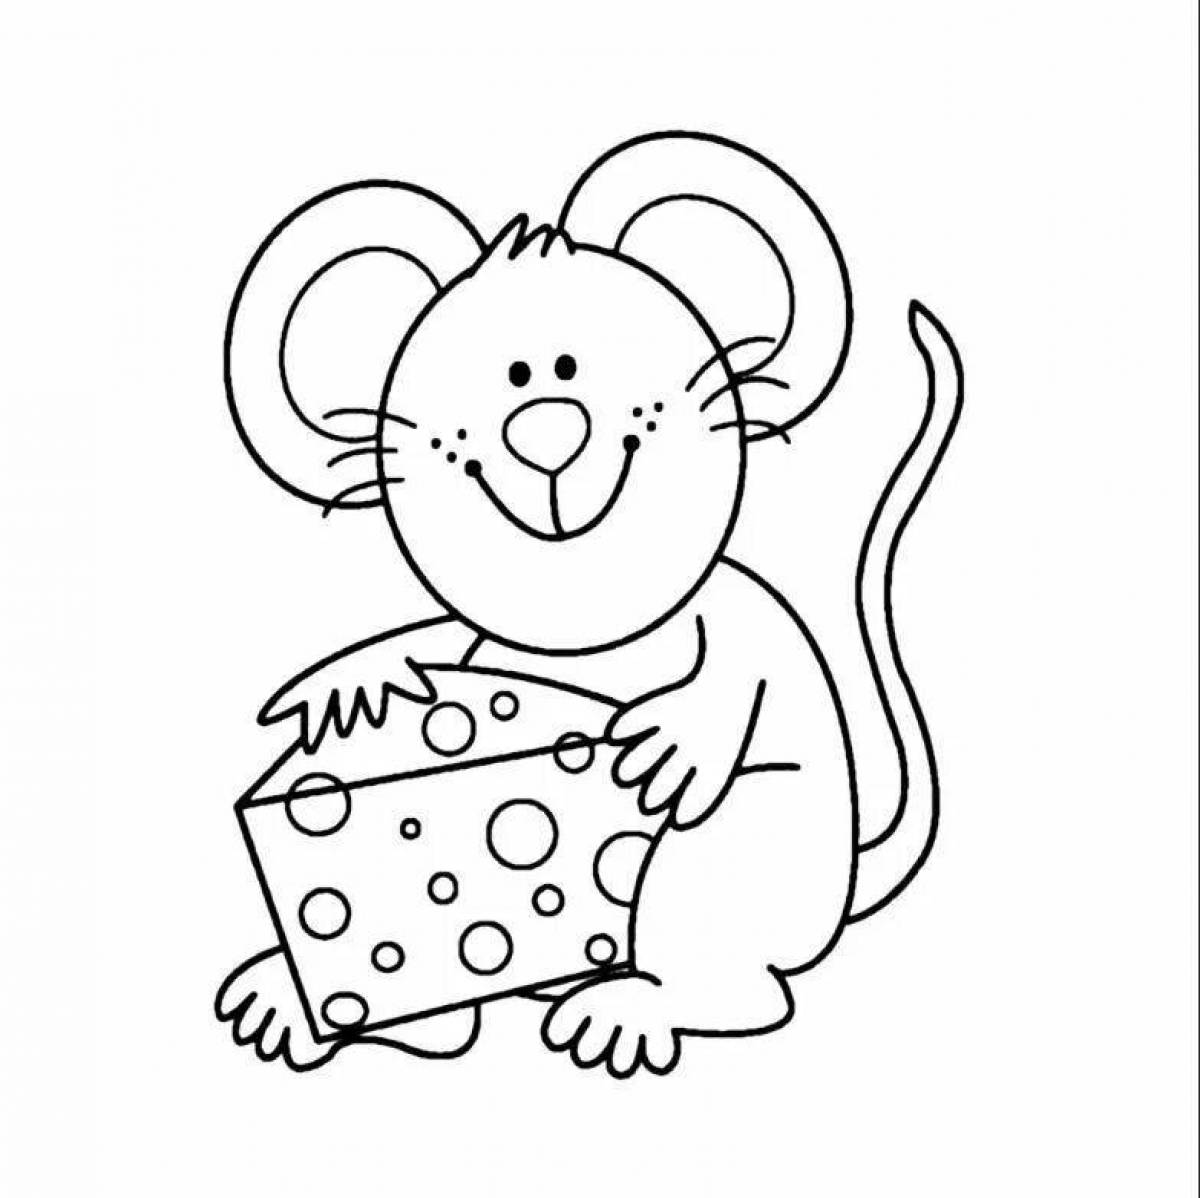 Delightful mouse with cheese coloring book